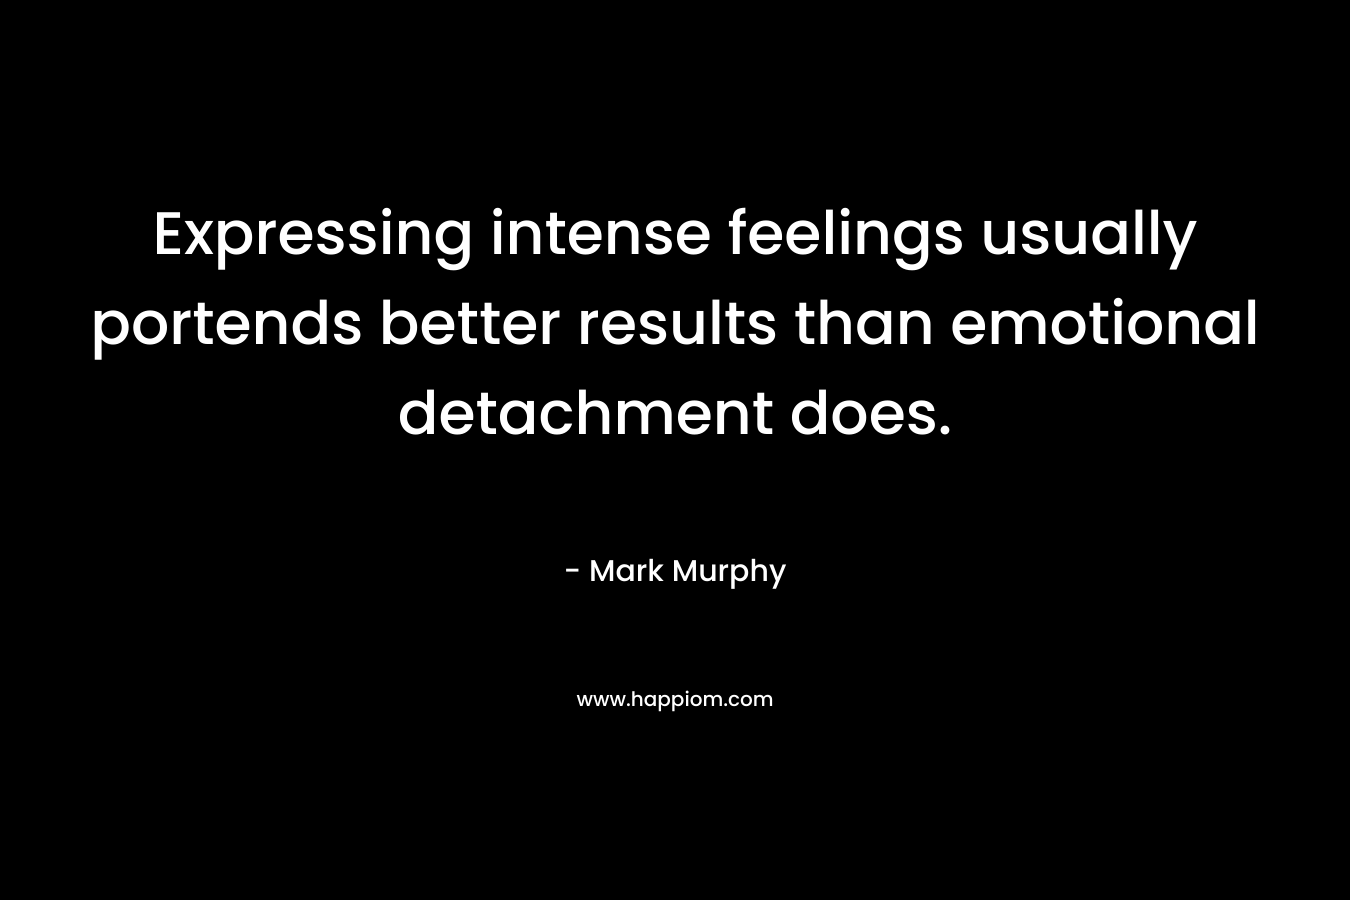 Expressing intense feelings usually portends better results than emotional detachment does. – Mark Murphy